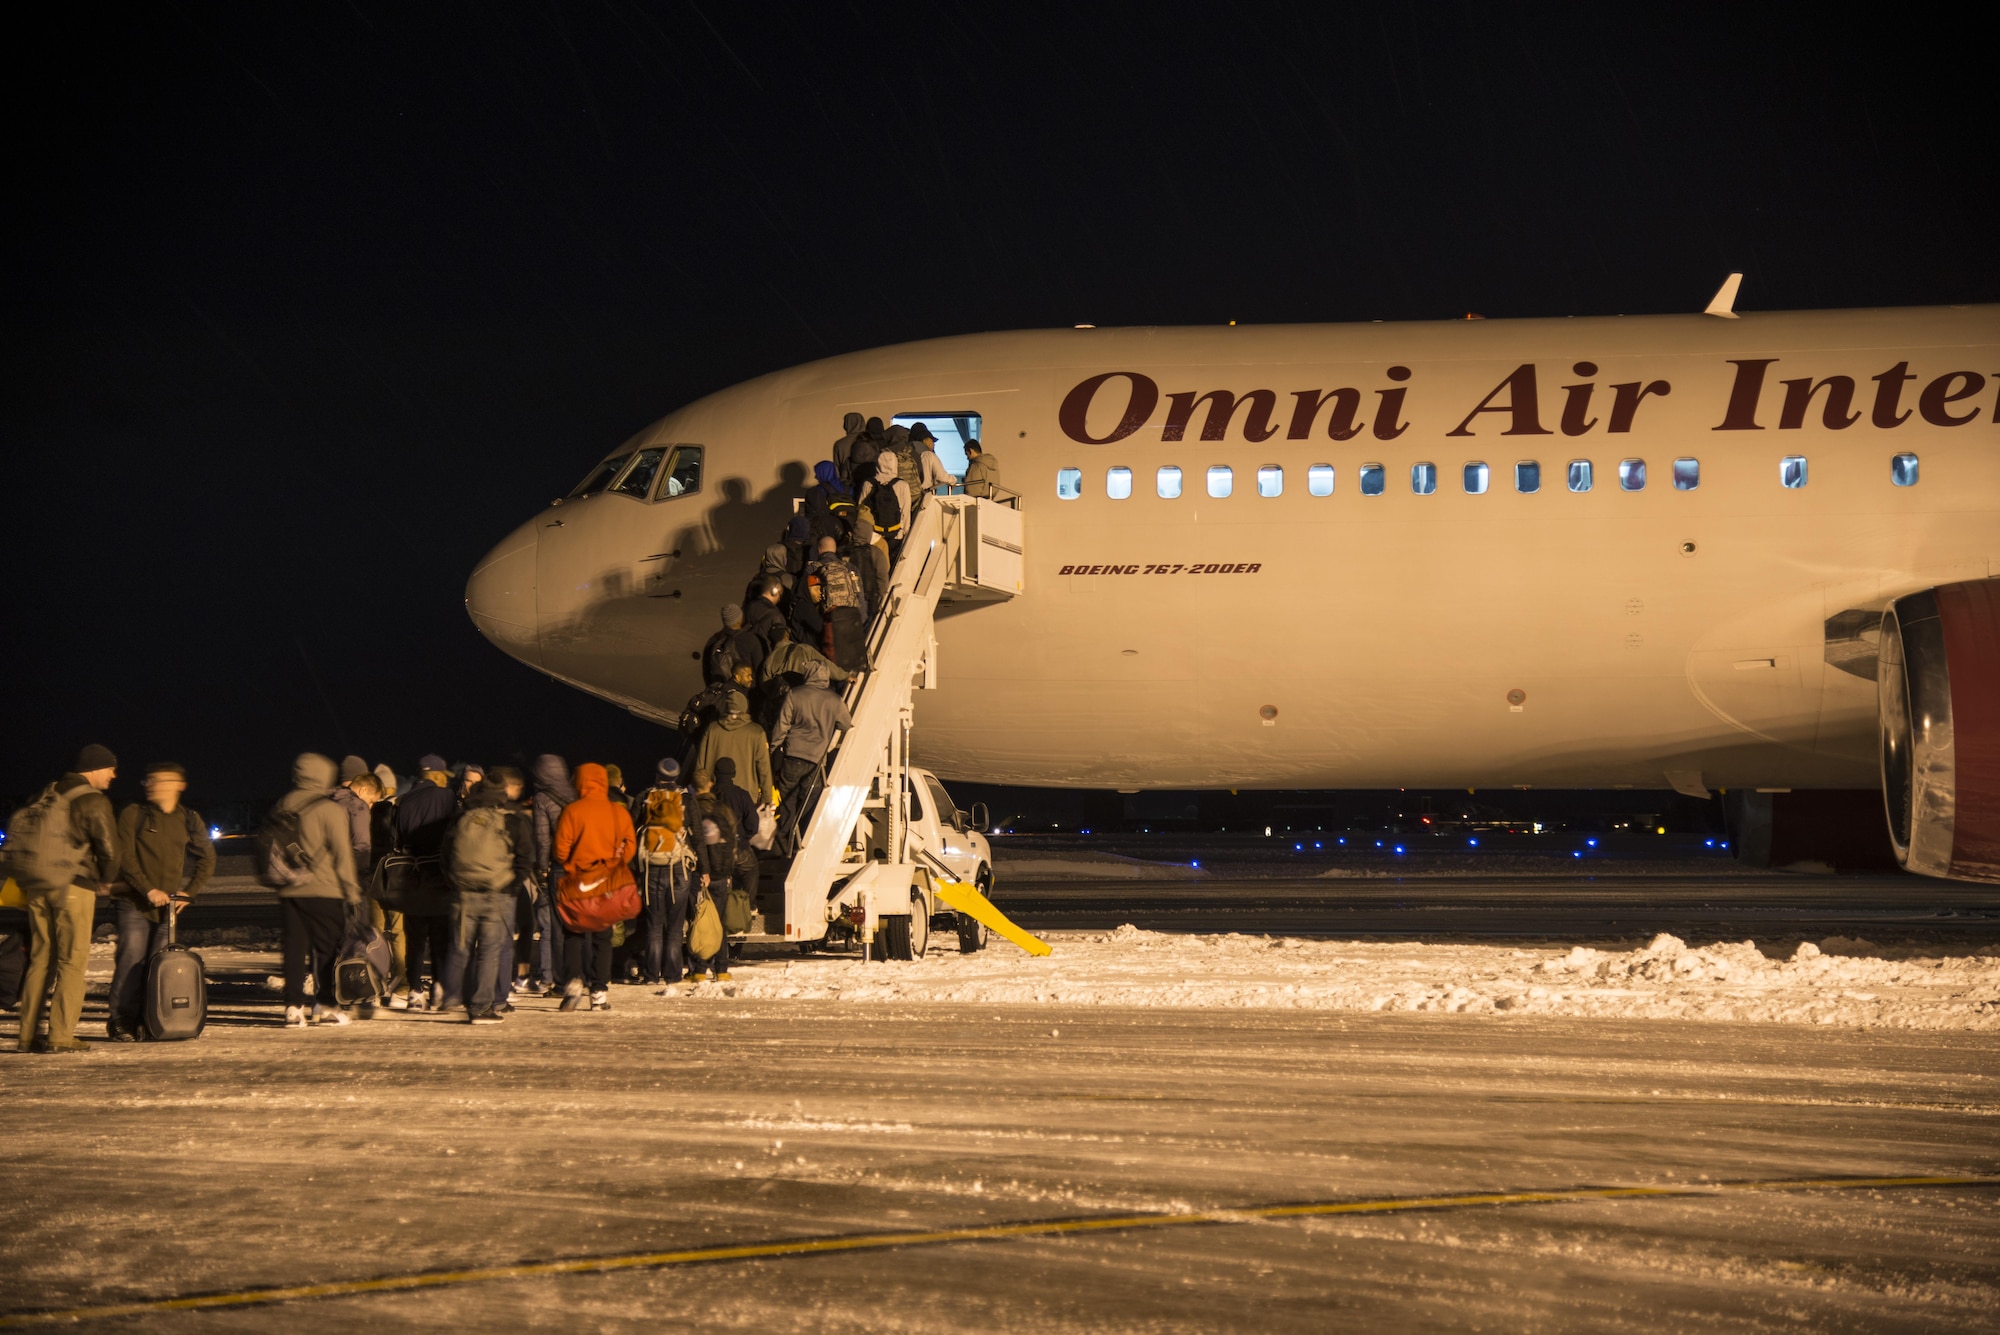 U.S. Air Force Airmen board an aircraft at Misawa Air Base, Japan, Feb. 7, 2017. The Airmen departed to Andersen Air Force Base, Guam, as part of exercise COPE NORTH 17. 
CN17 is a long-standing exercise designed to enhance multilateral air operations between the U.S. Air Force, U.S. Navy, Japan Air Self-Defense Force and Royal Australian Air Force. (U.S. Air Force photo by Senior Airman Brittany A. Chase)